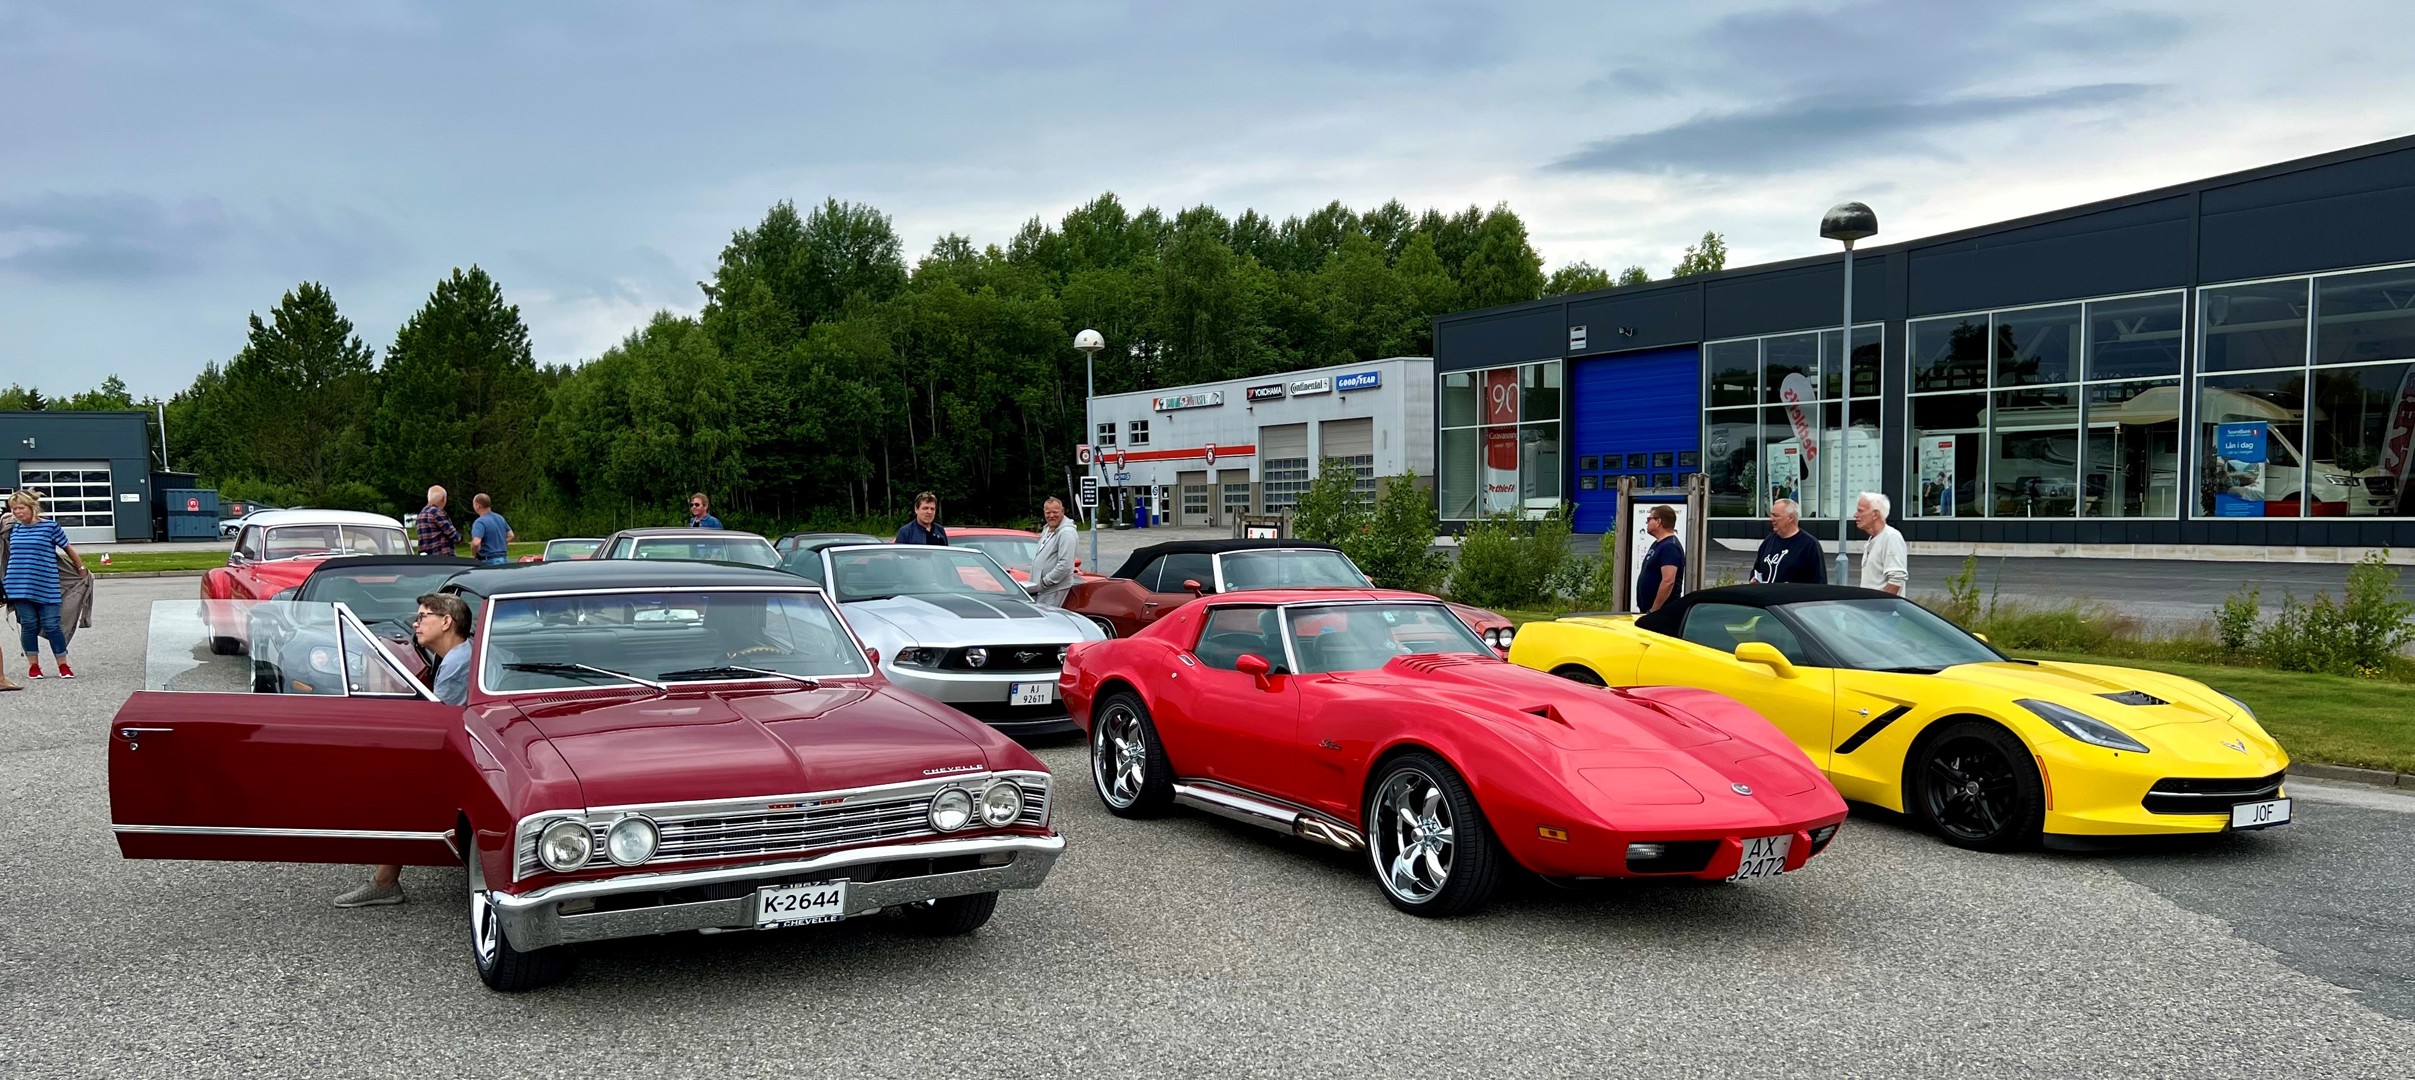 4th of July cruising i Indre Østfold